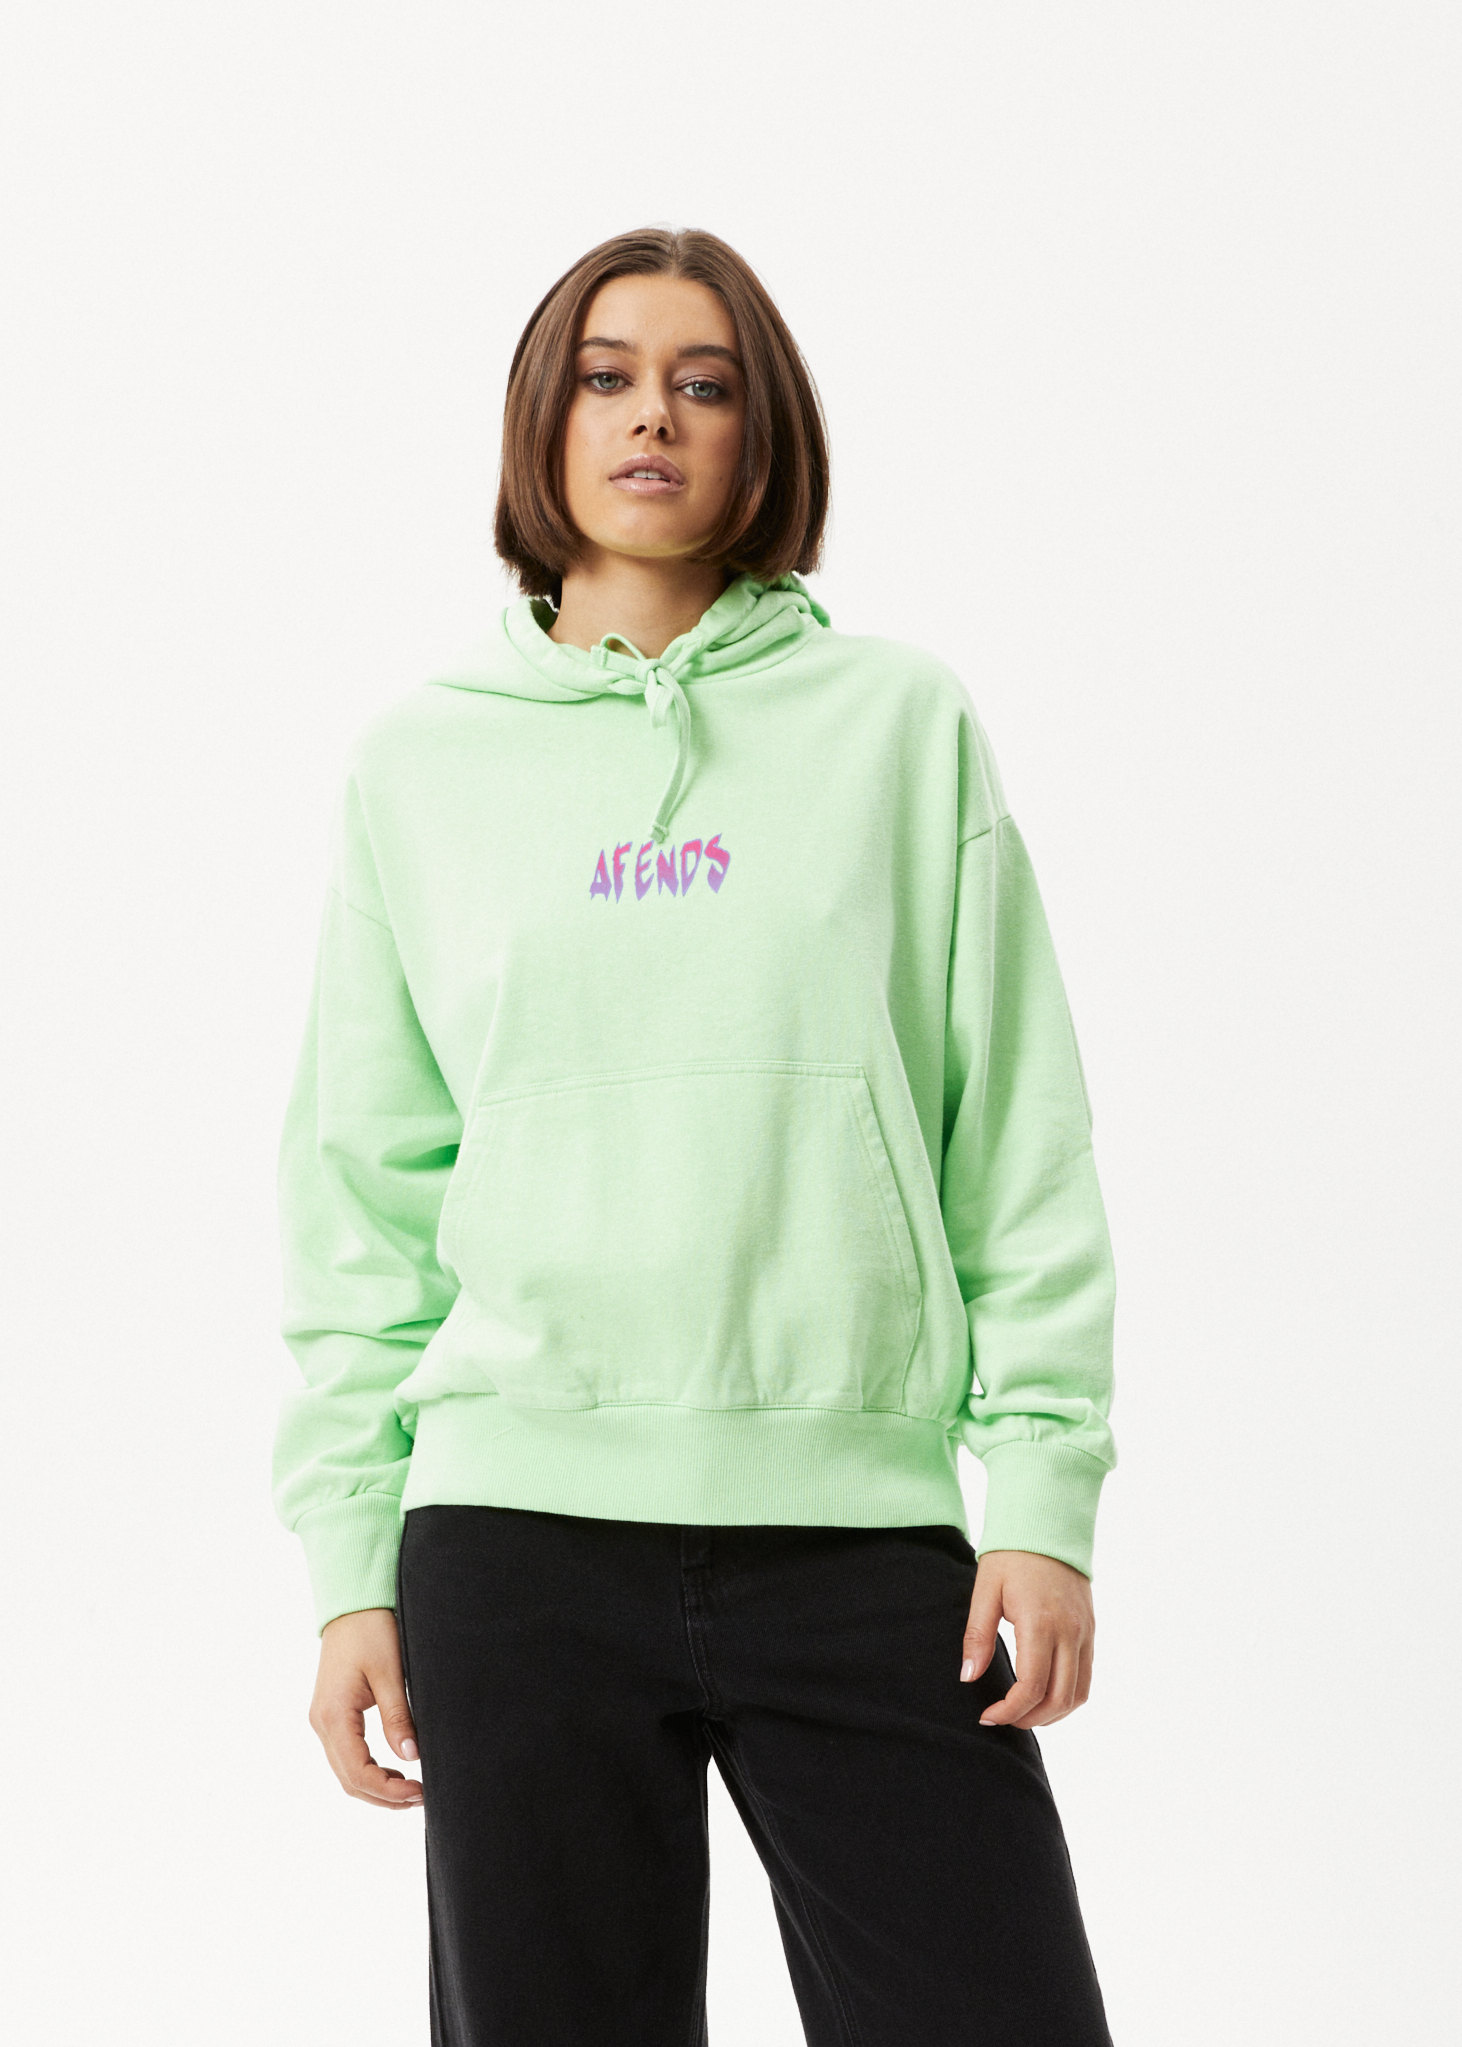 Shop Aelfric Eden Unisex Long Sleeves Skater Style Hoodies by Ｍ.T.F